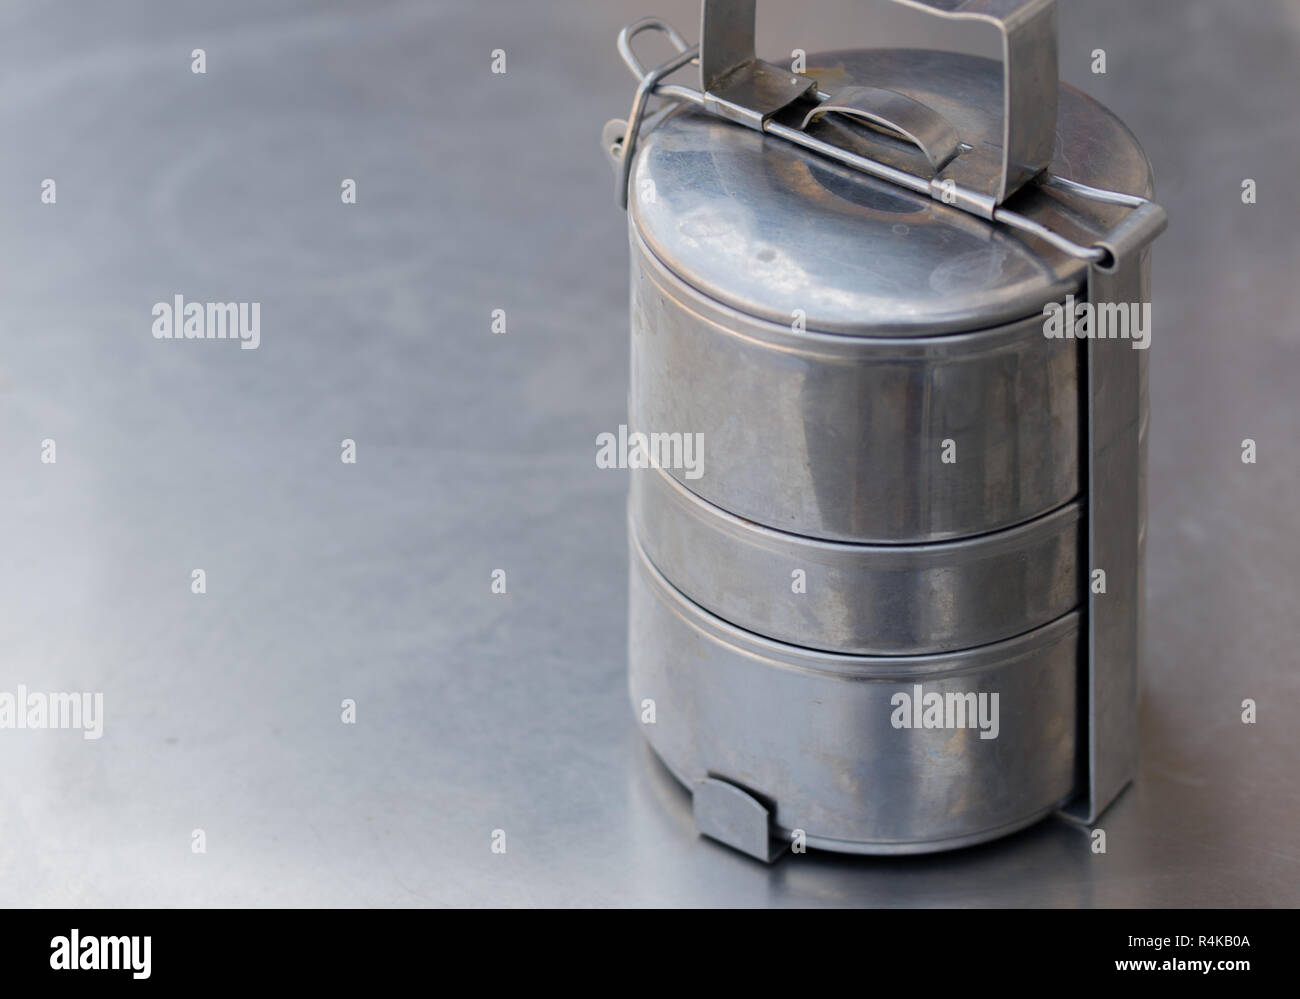 OLD STAINLESS STEEL LUNCH BOX Stock Photo